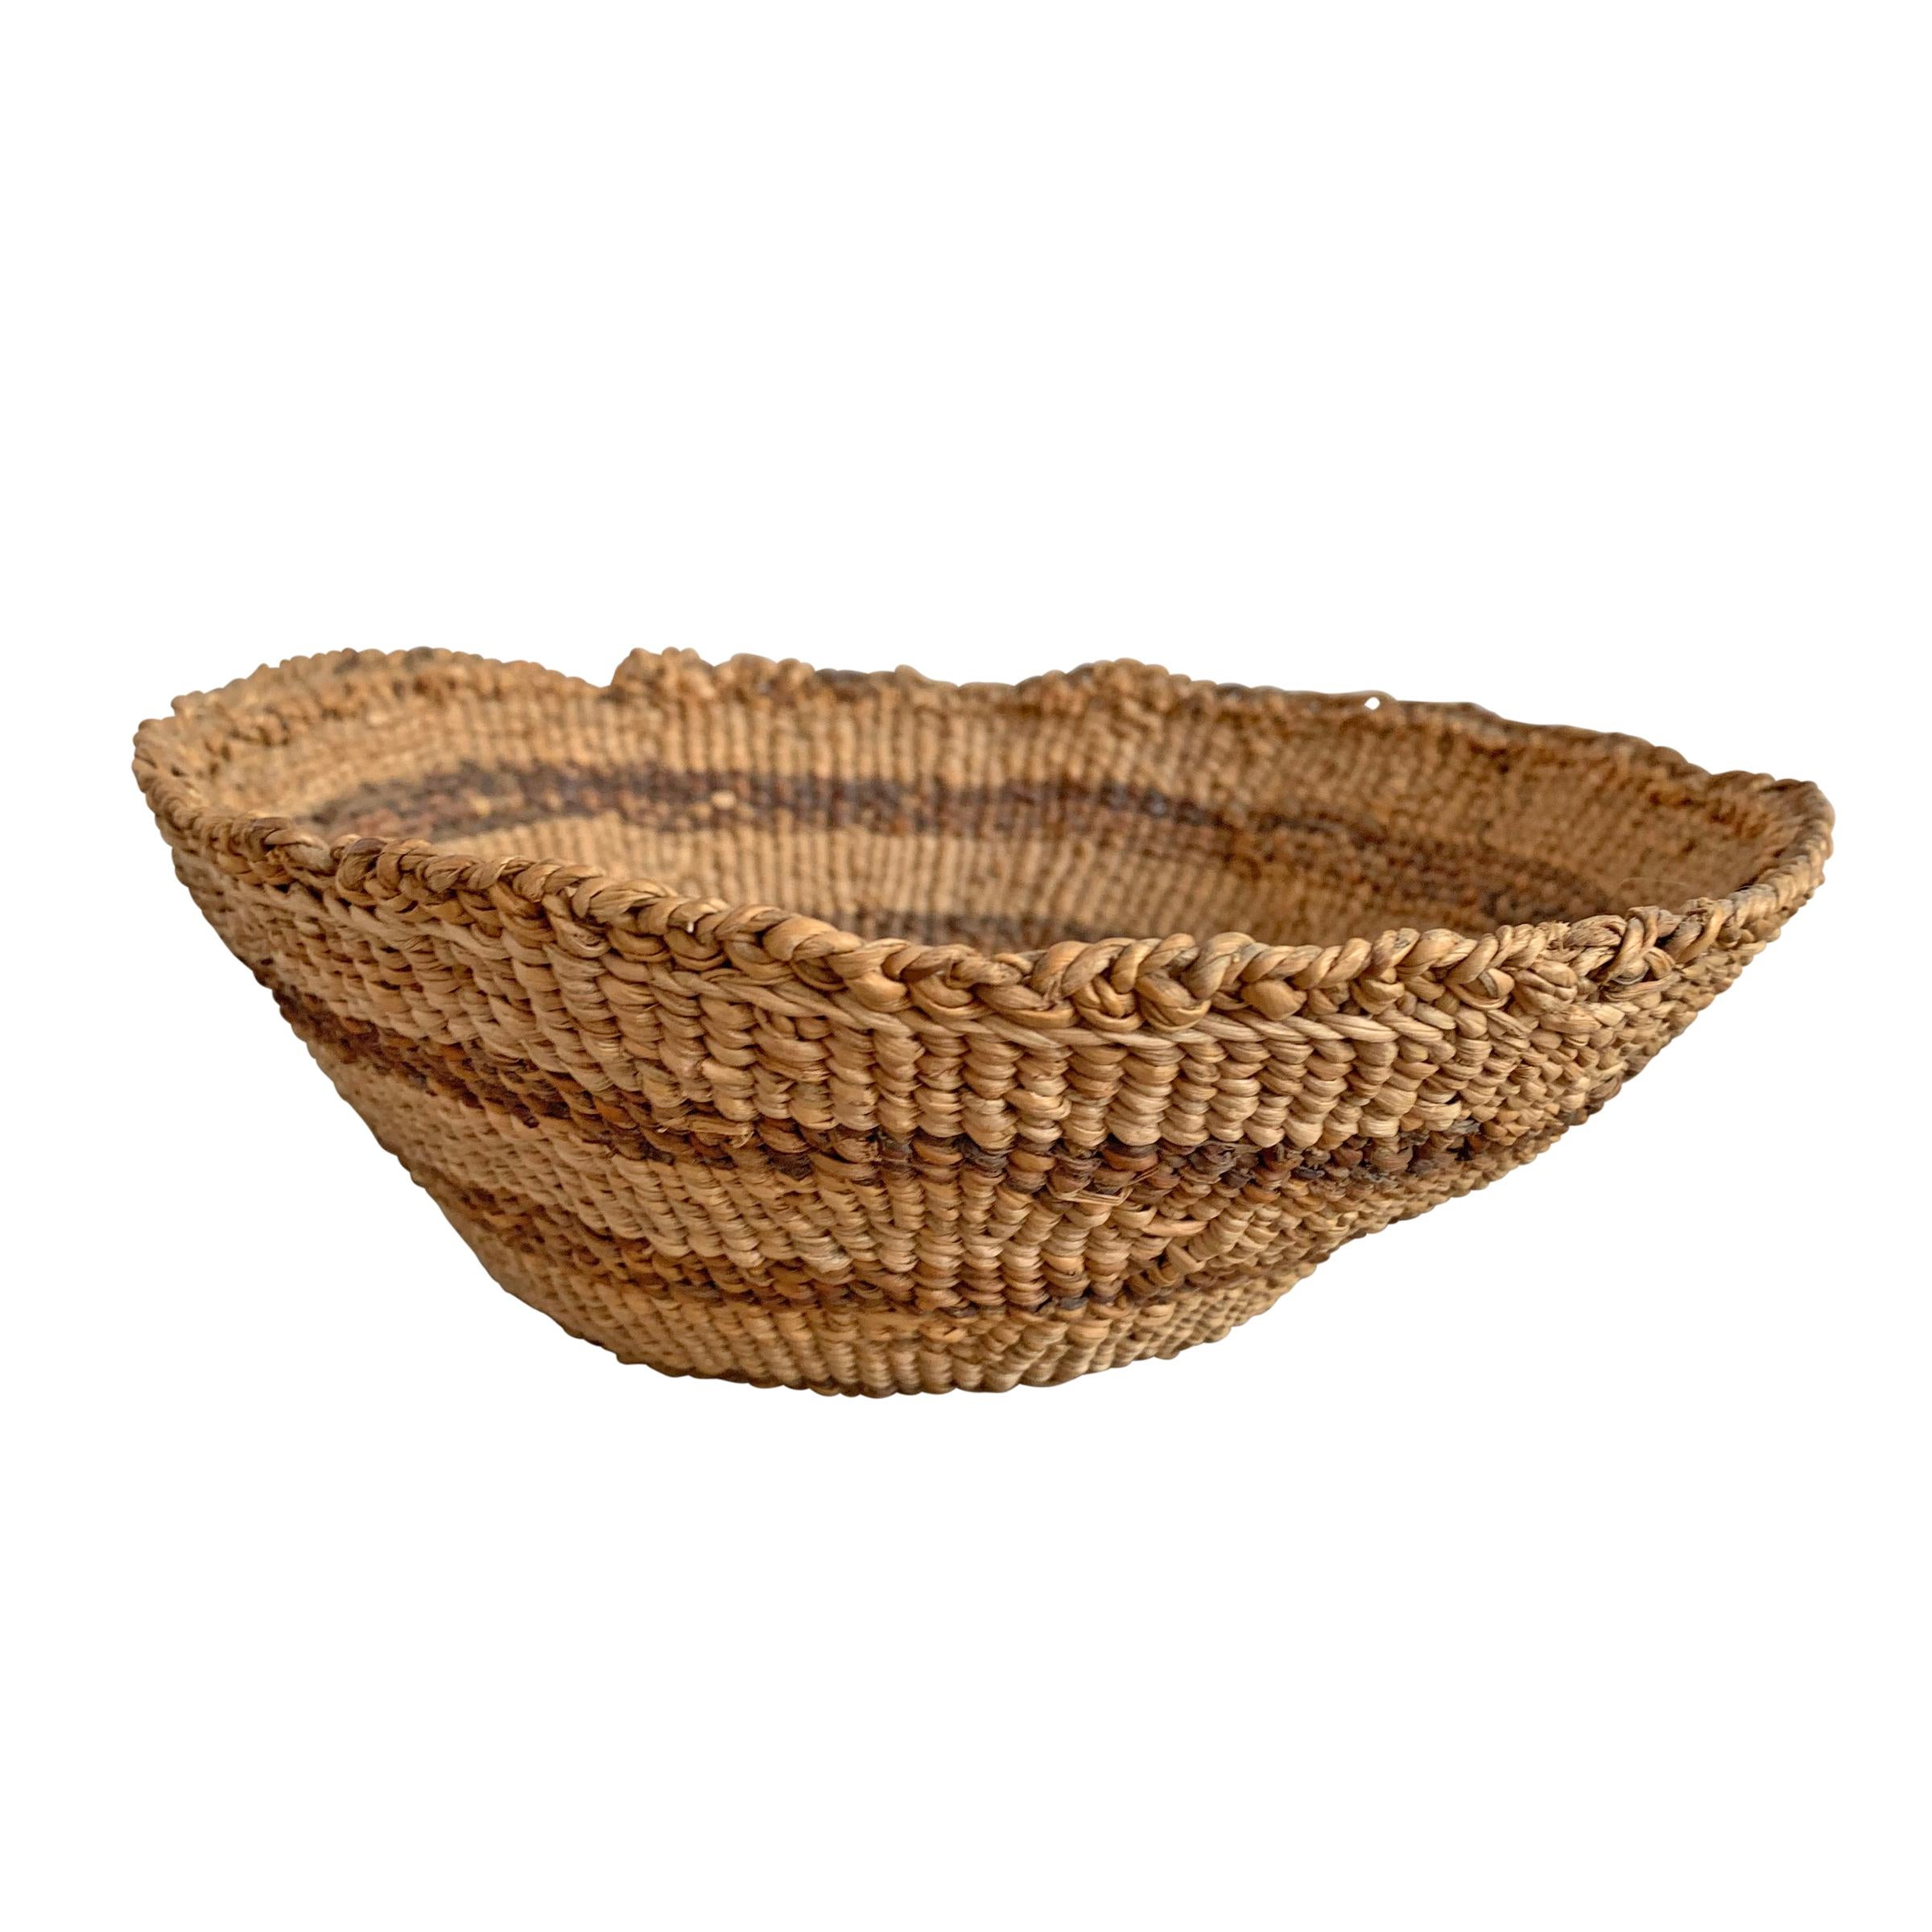 Early 20th Century Pacific NW Native American Basket 1